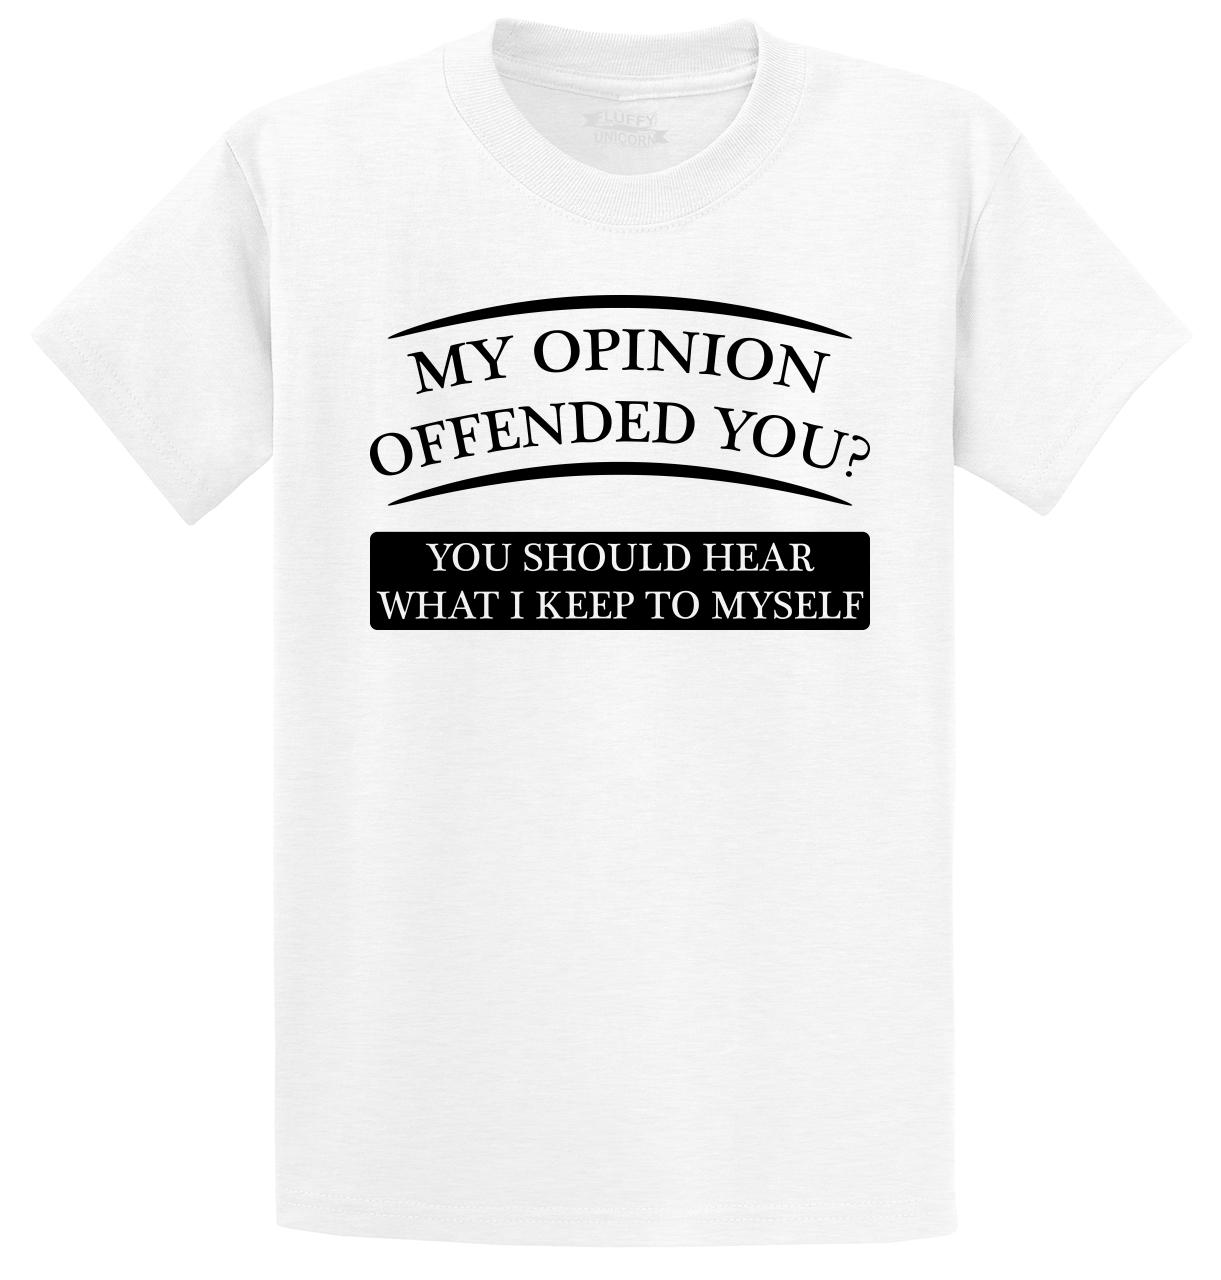 My Opinion Offended You Funny T Shirt College Party T Tee S 5xl 9 29 Picclick